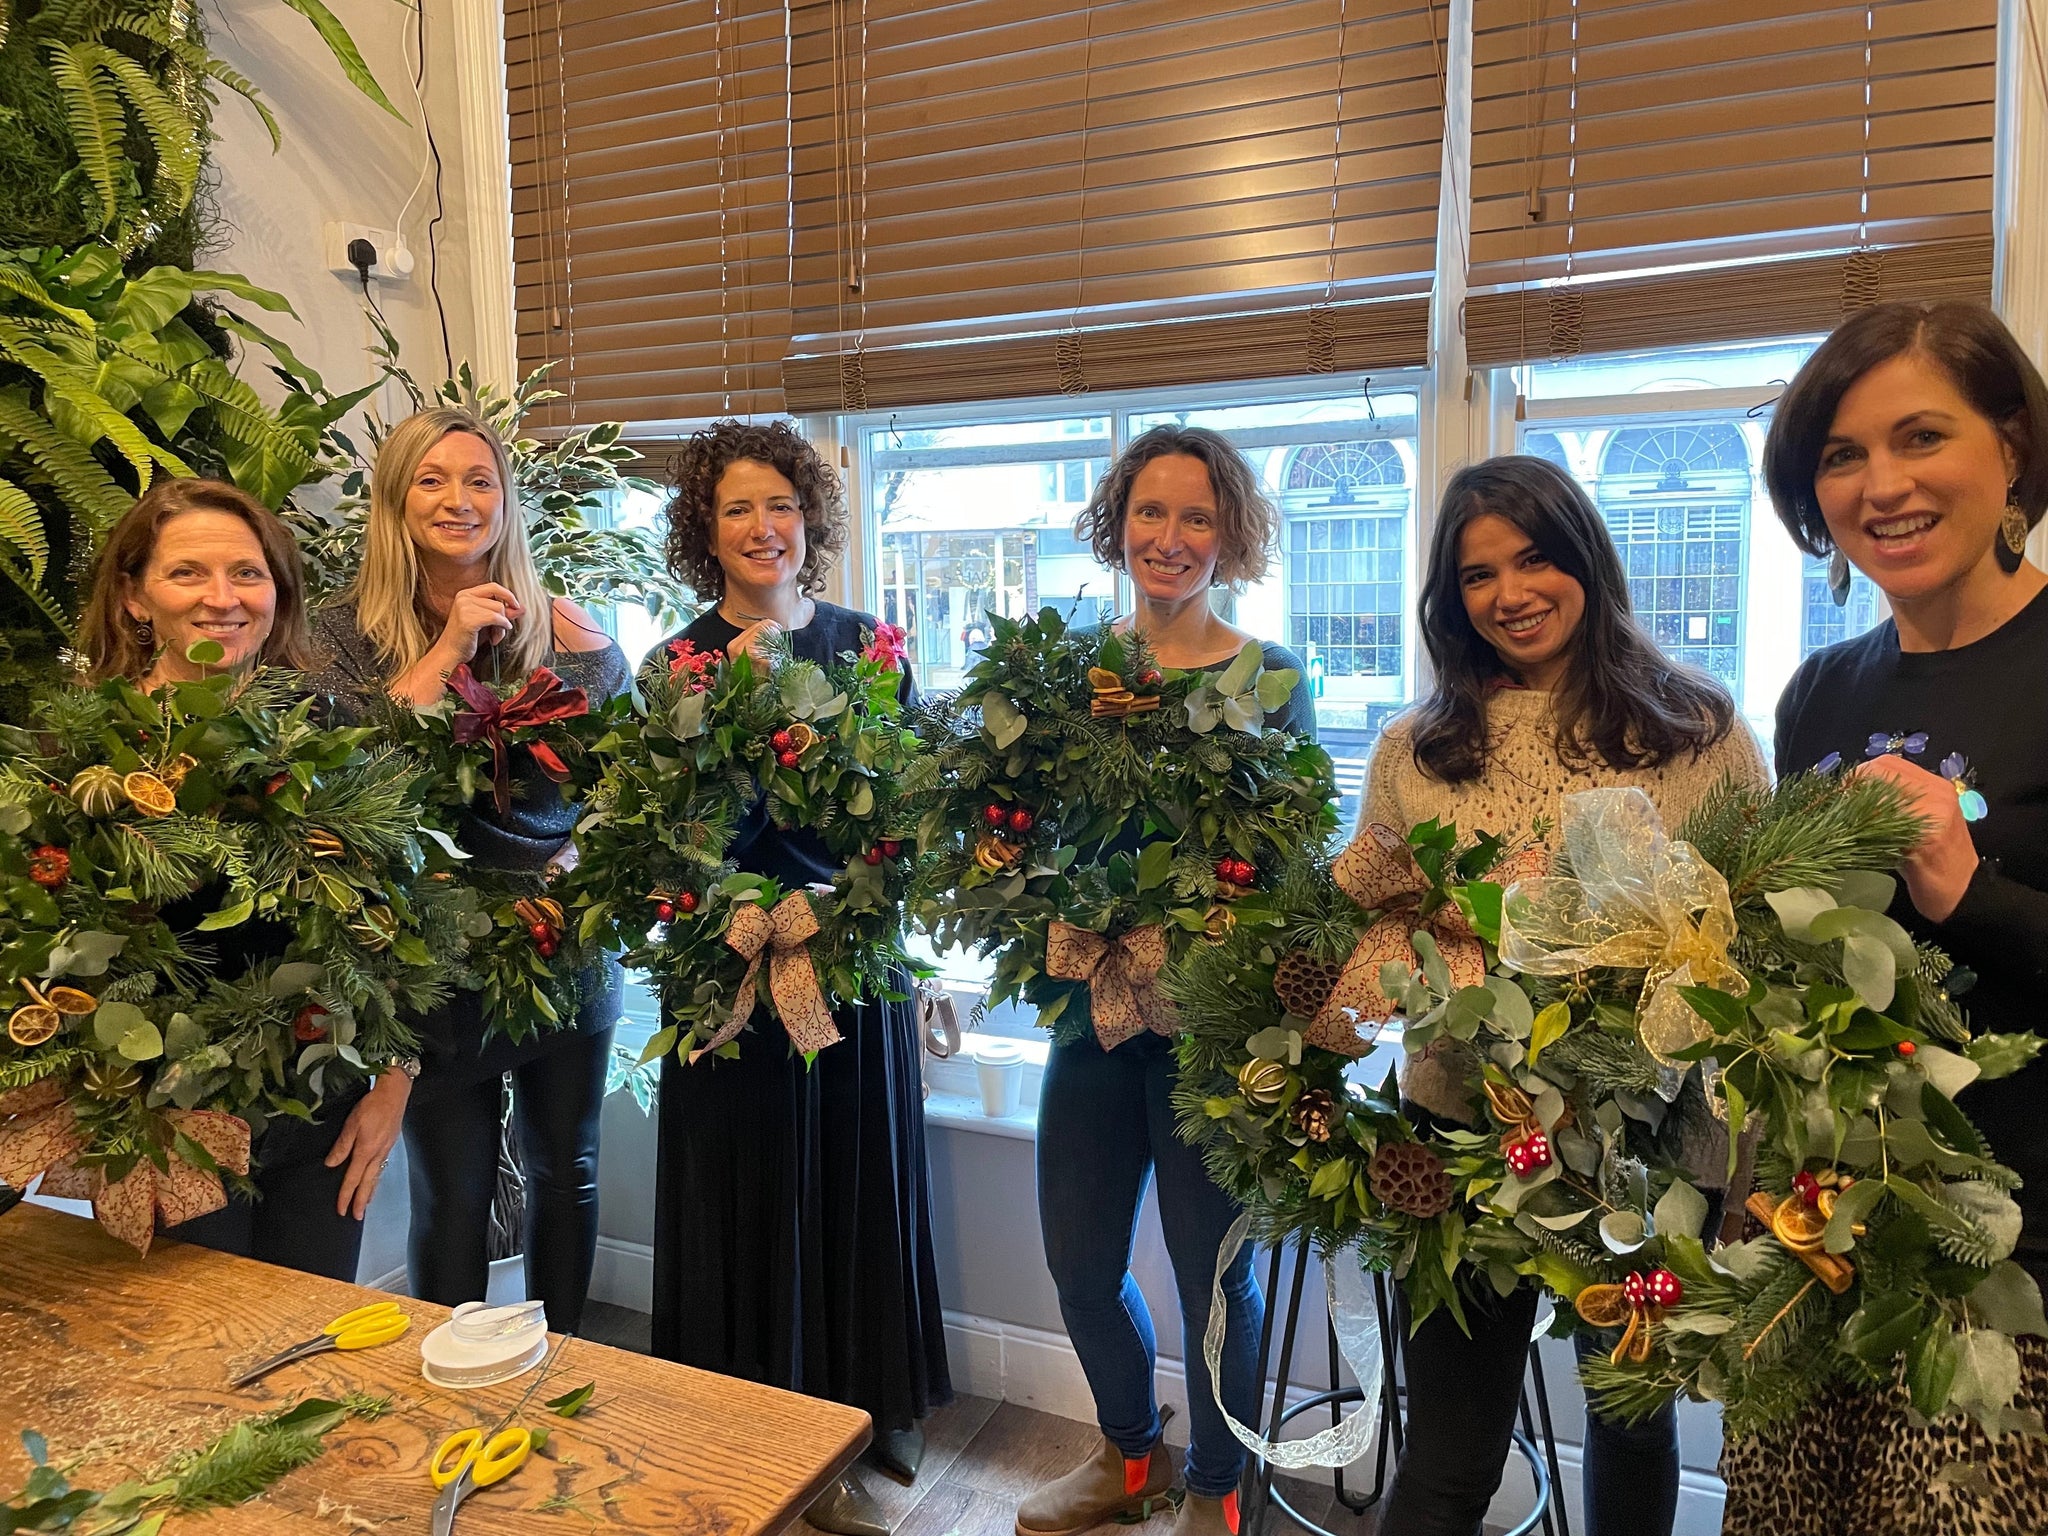 Christmas Wreath Workshop – Thursday 7th December, Starting @ 11am (£75 per person) 2.5 hours